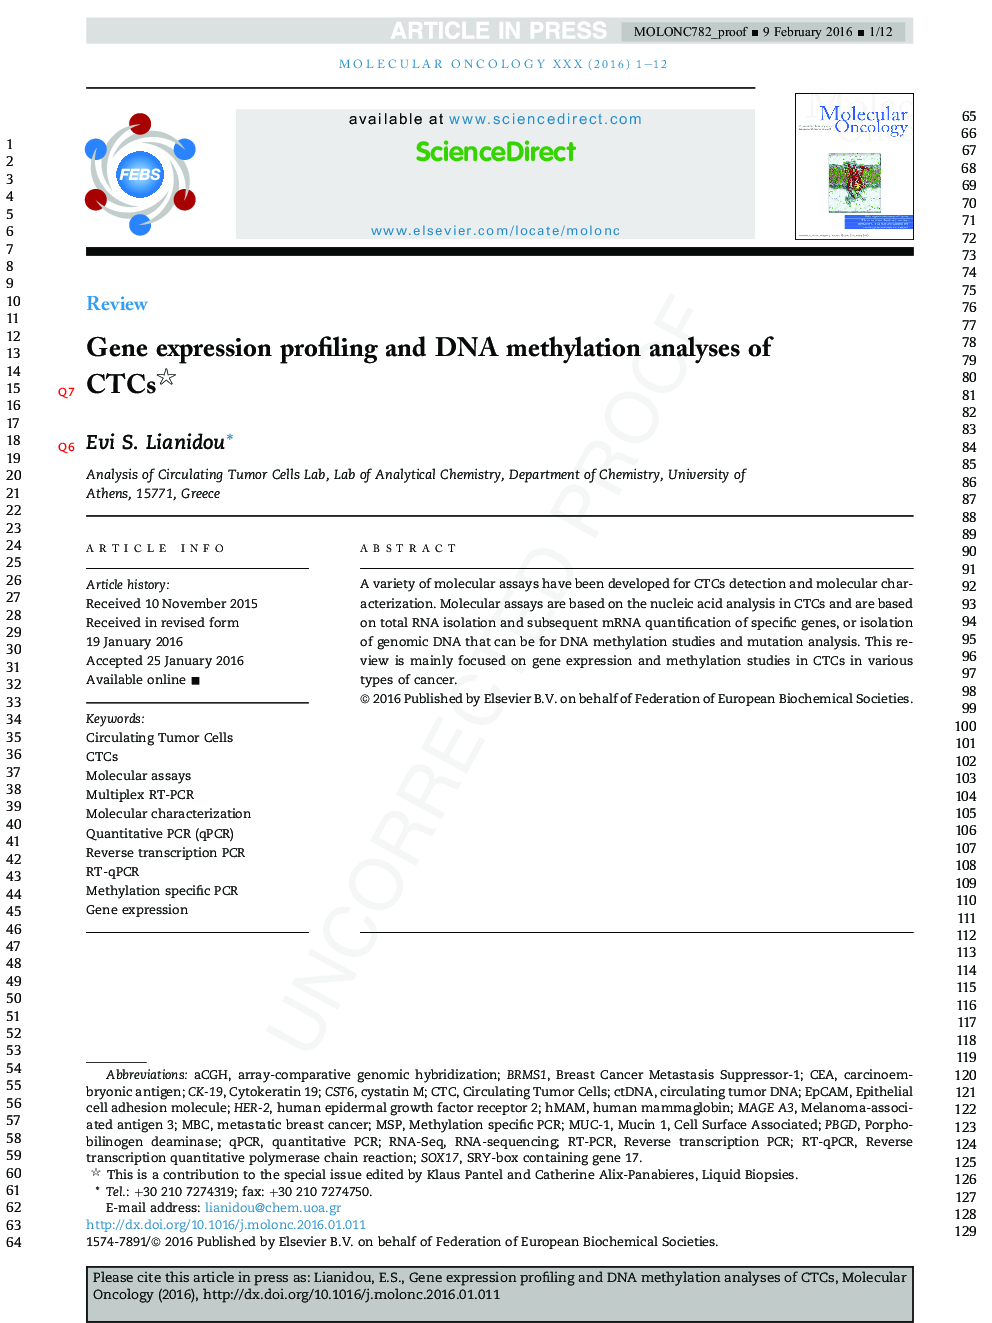 Gene expression profiling and DNA methylation analyses of CTCs